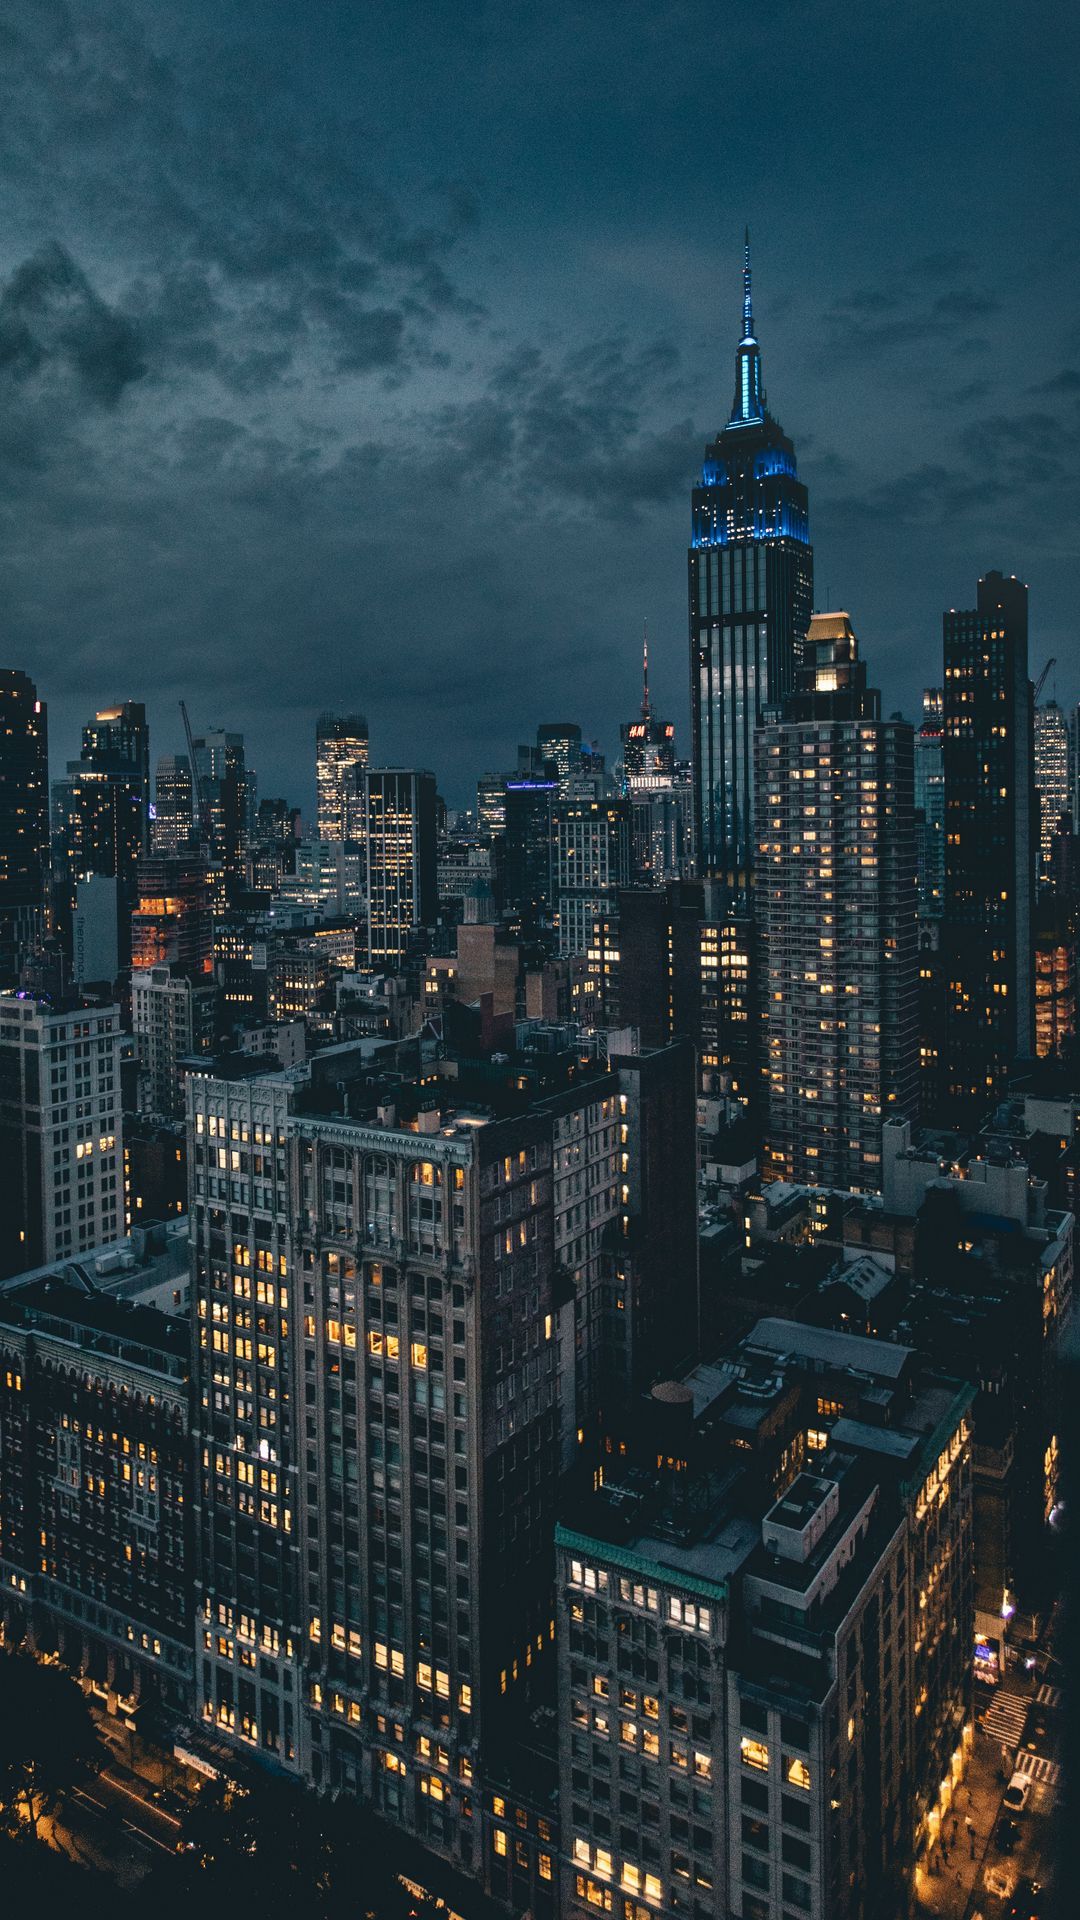 A city skyline at night with buildings and lights - New York